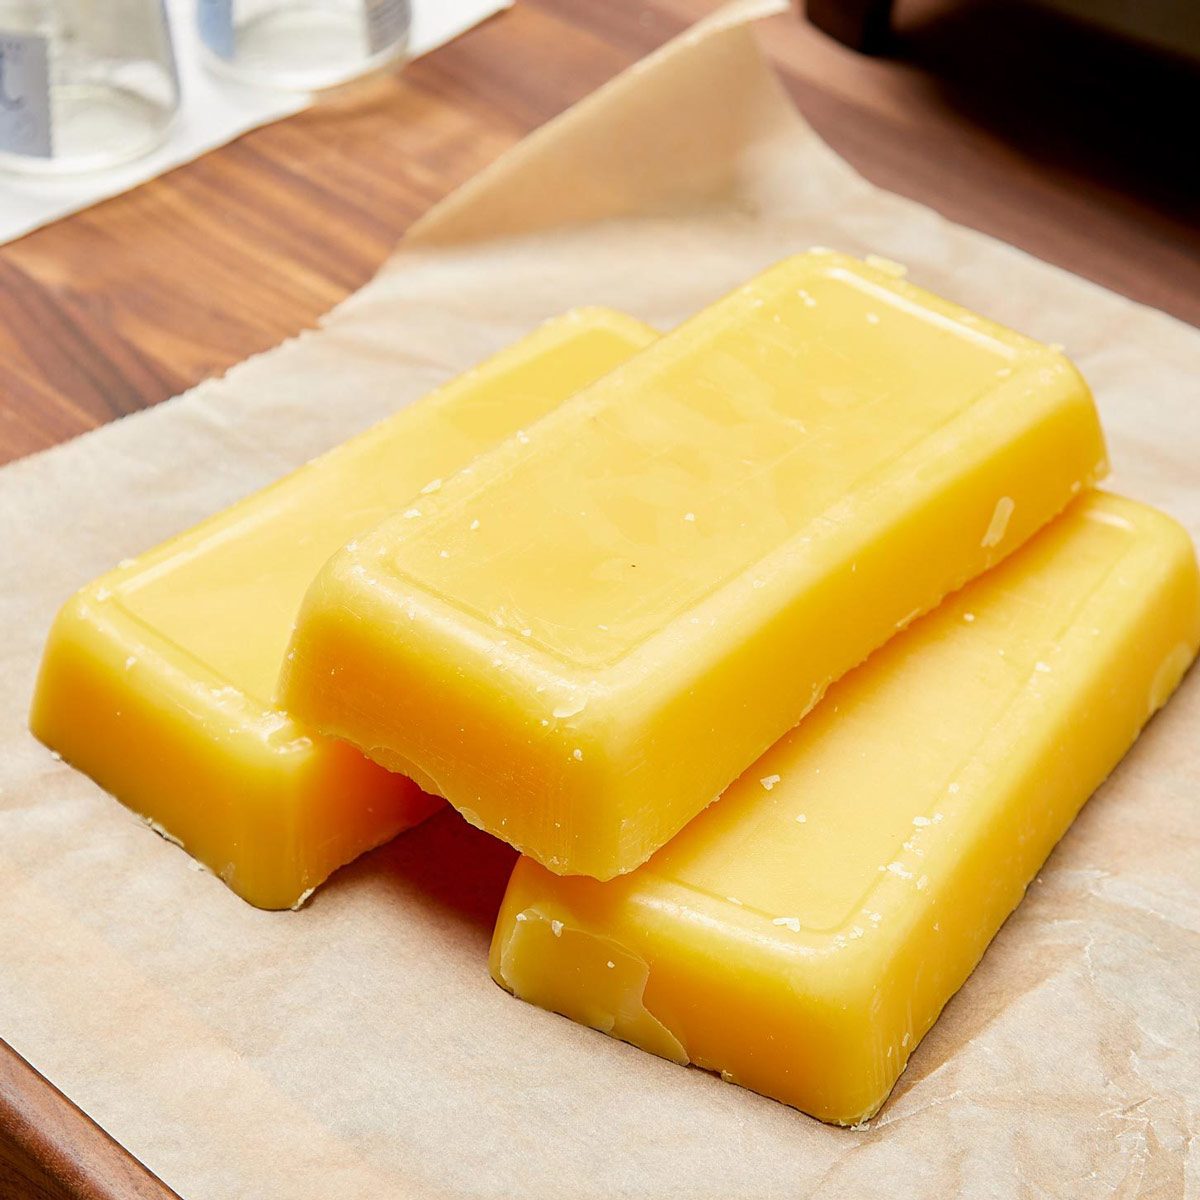 Buying beeswax for DIY beeswax candles